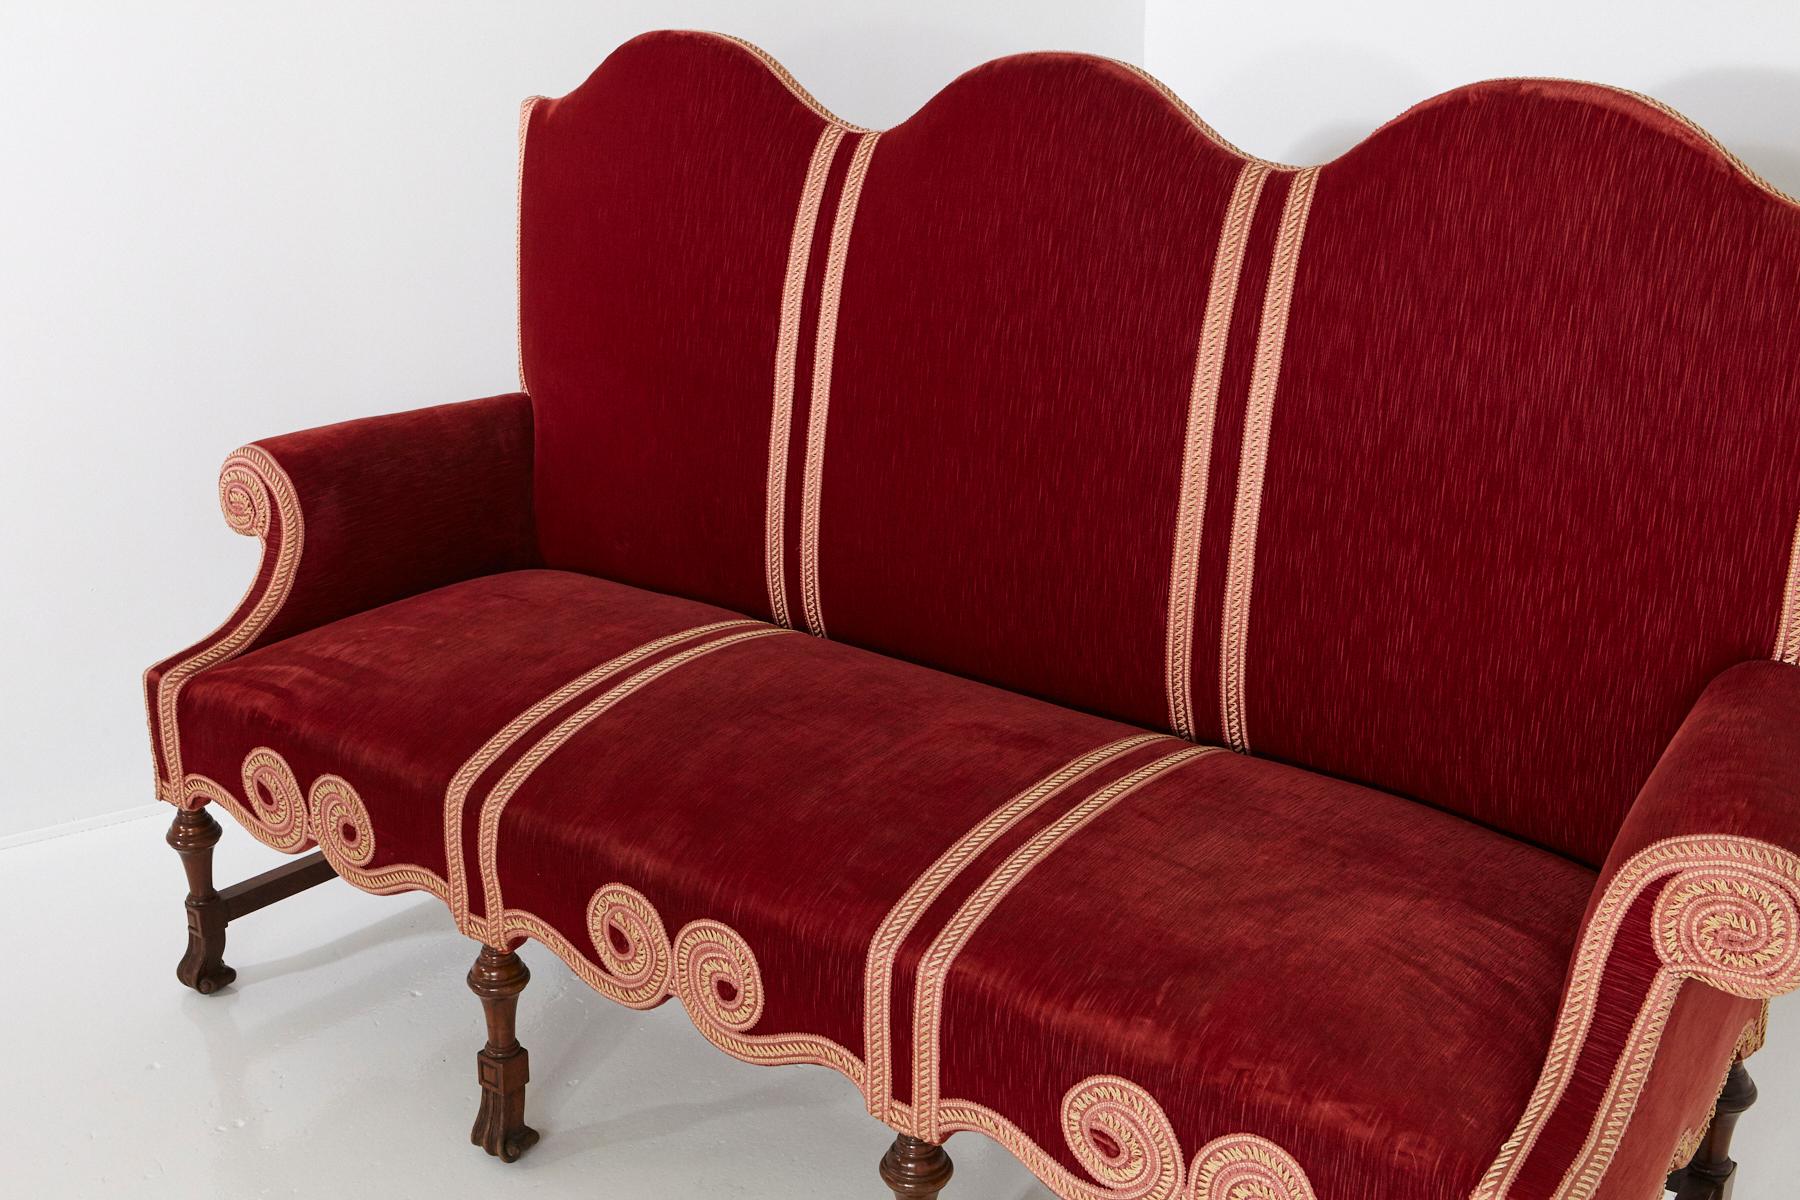 19th Century Victorian Long Seat Sofa in Red Striae Velvet with Scrolled Arms and Camelback